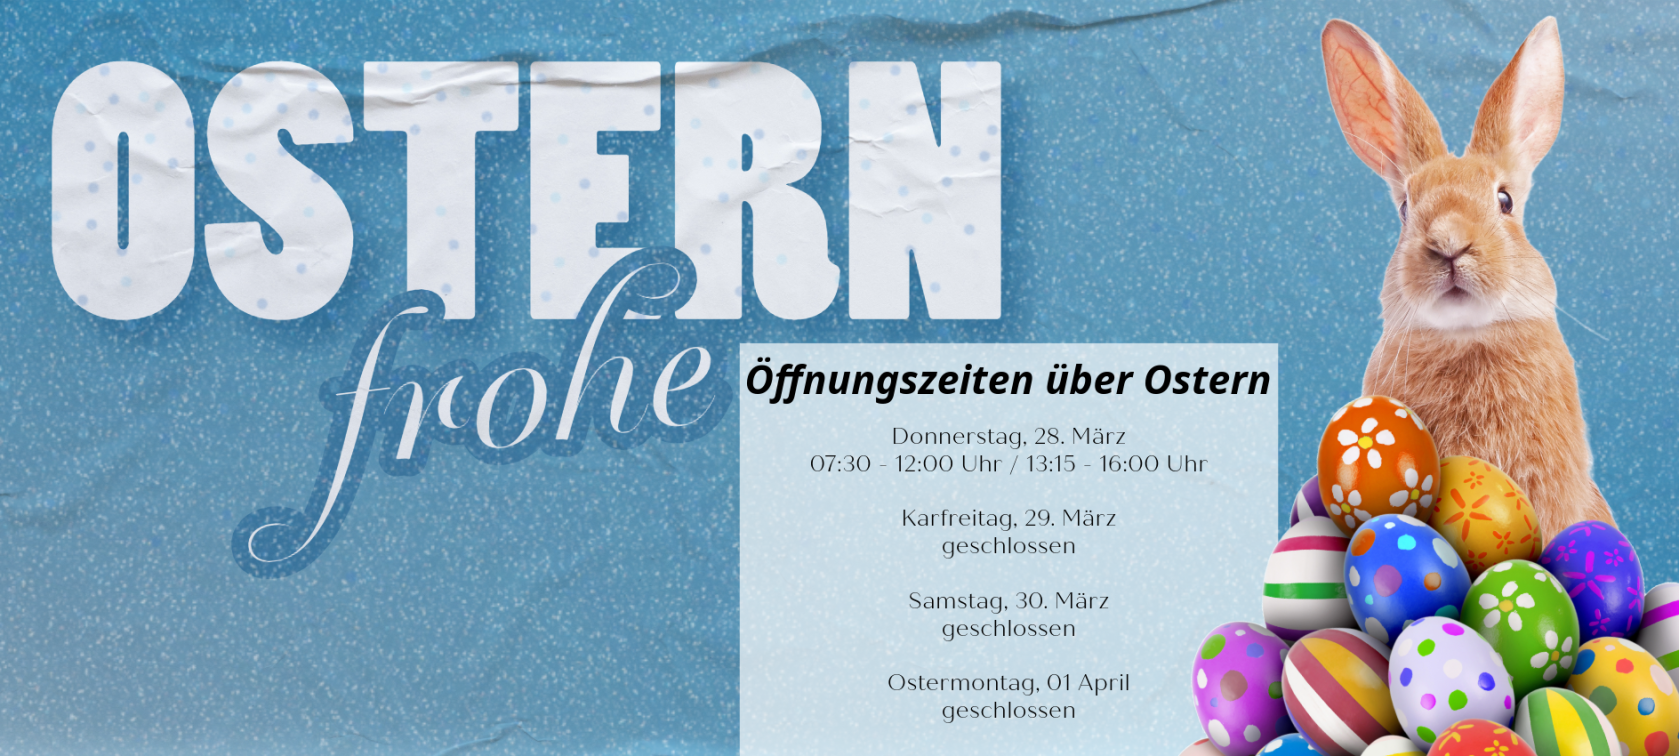 Ostertage